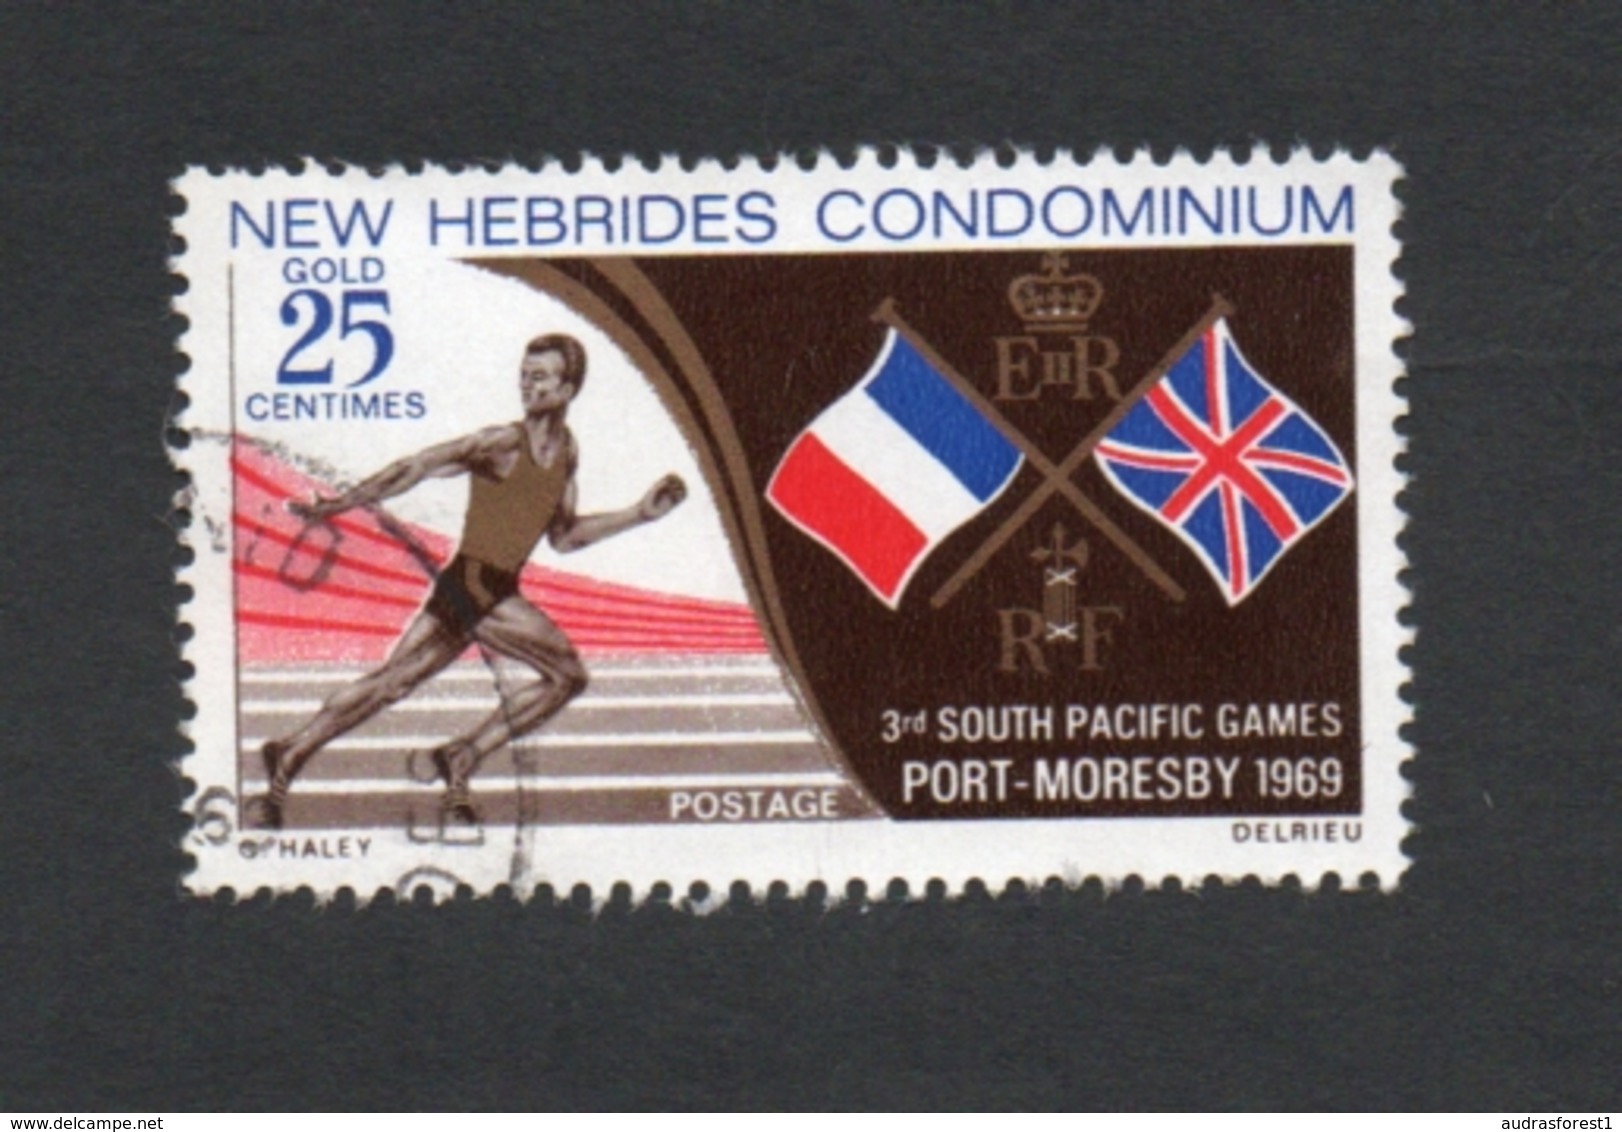 1969 PORT MORESBY SOUTH PACIFIC GAMES New Hebrides 25c  Yvert Tellier No. 284 Timbre Usagee, Sans Charniere - Used Stamps